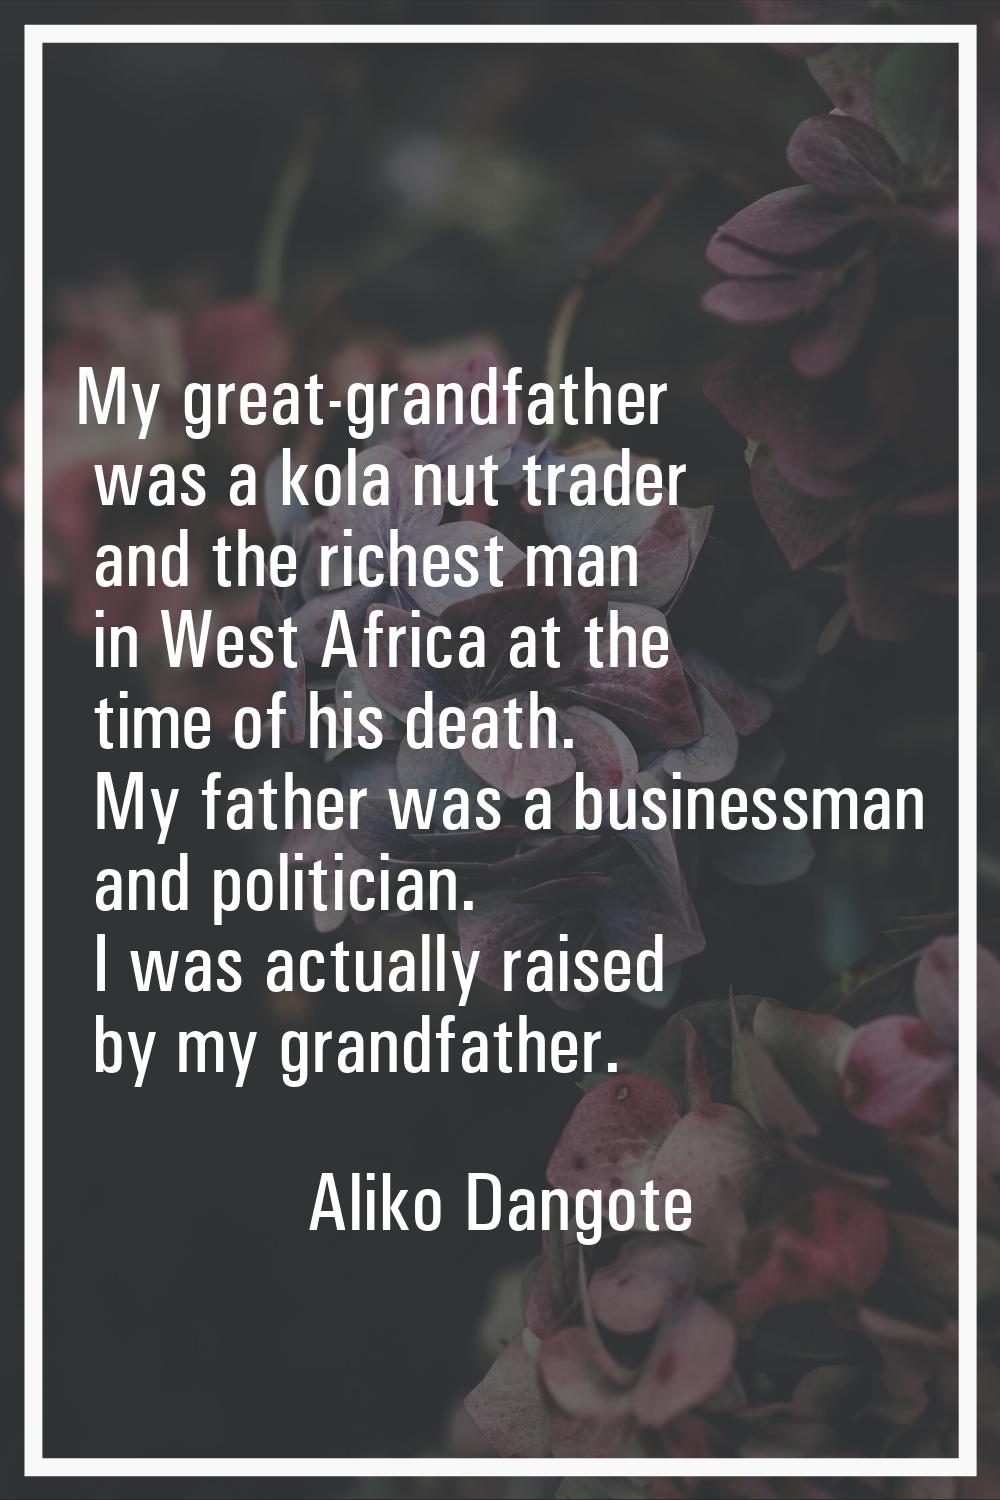 My great-grandfather was a kola nut trader and the richest man in West Africa at the time of his de